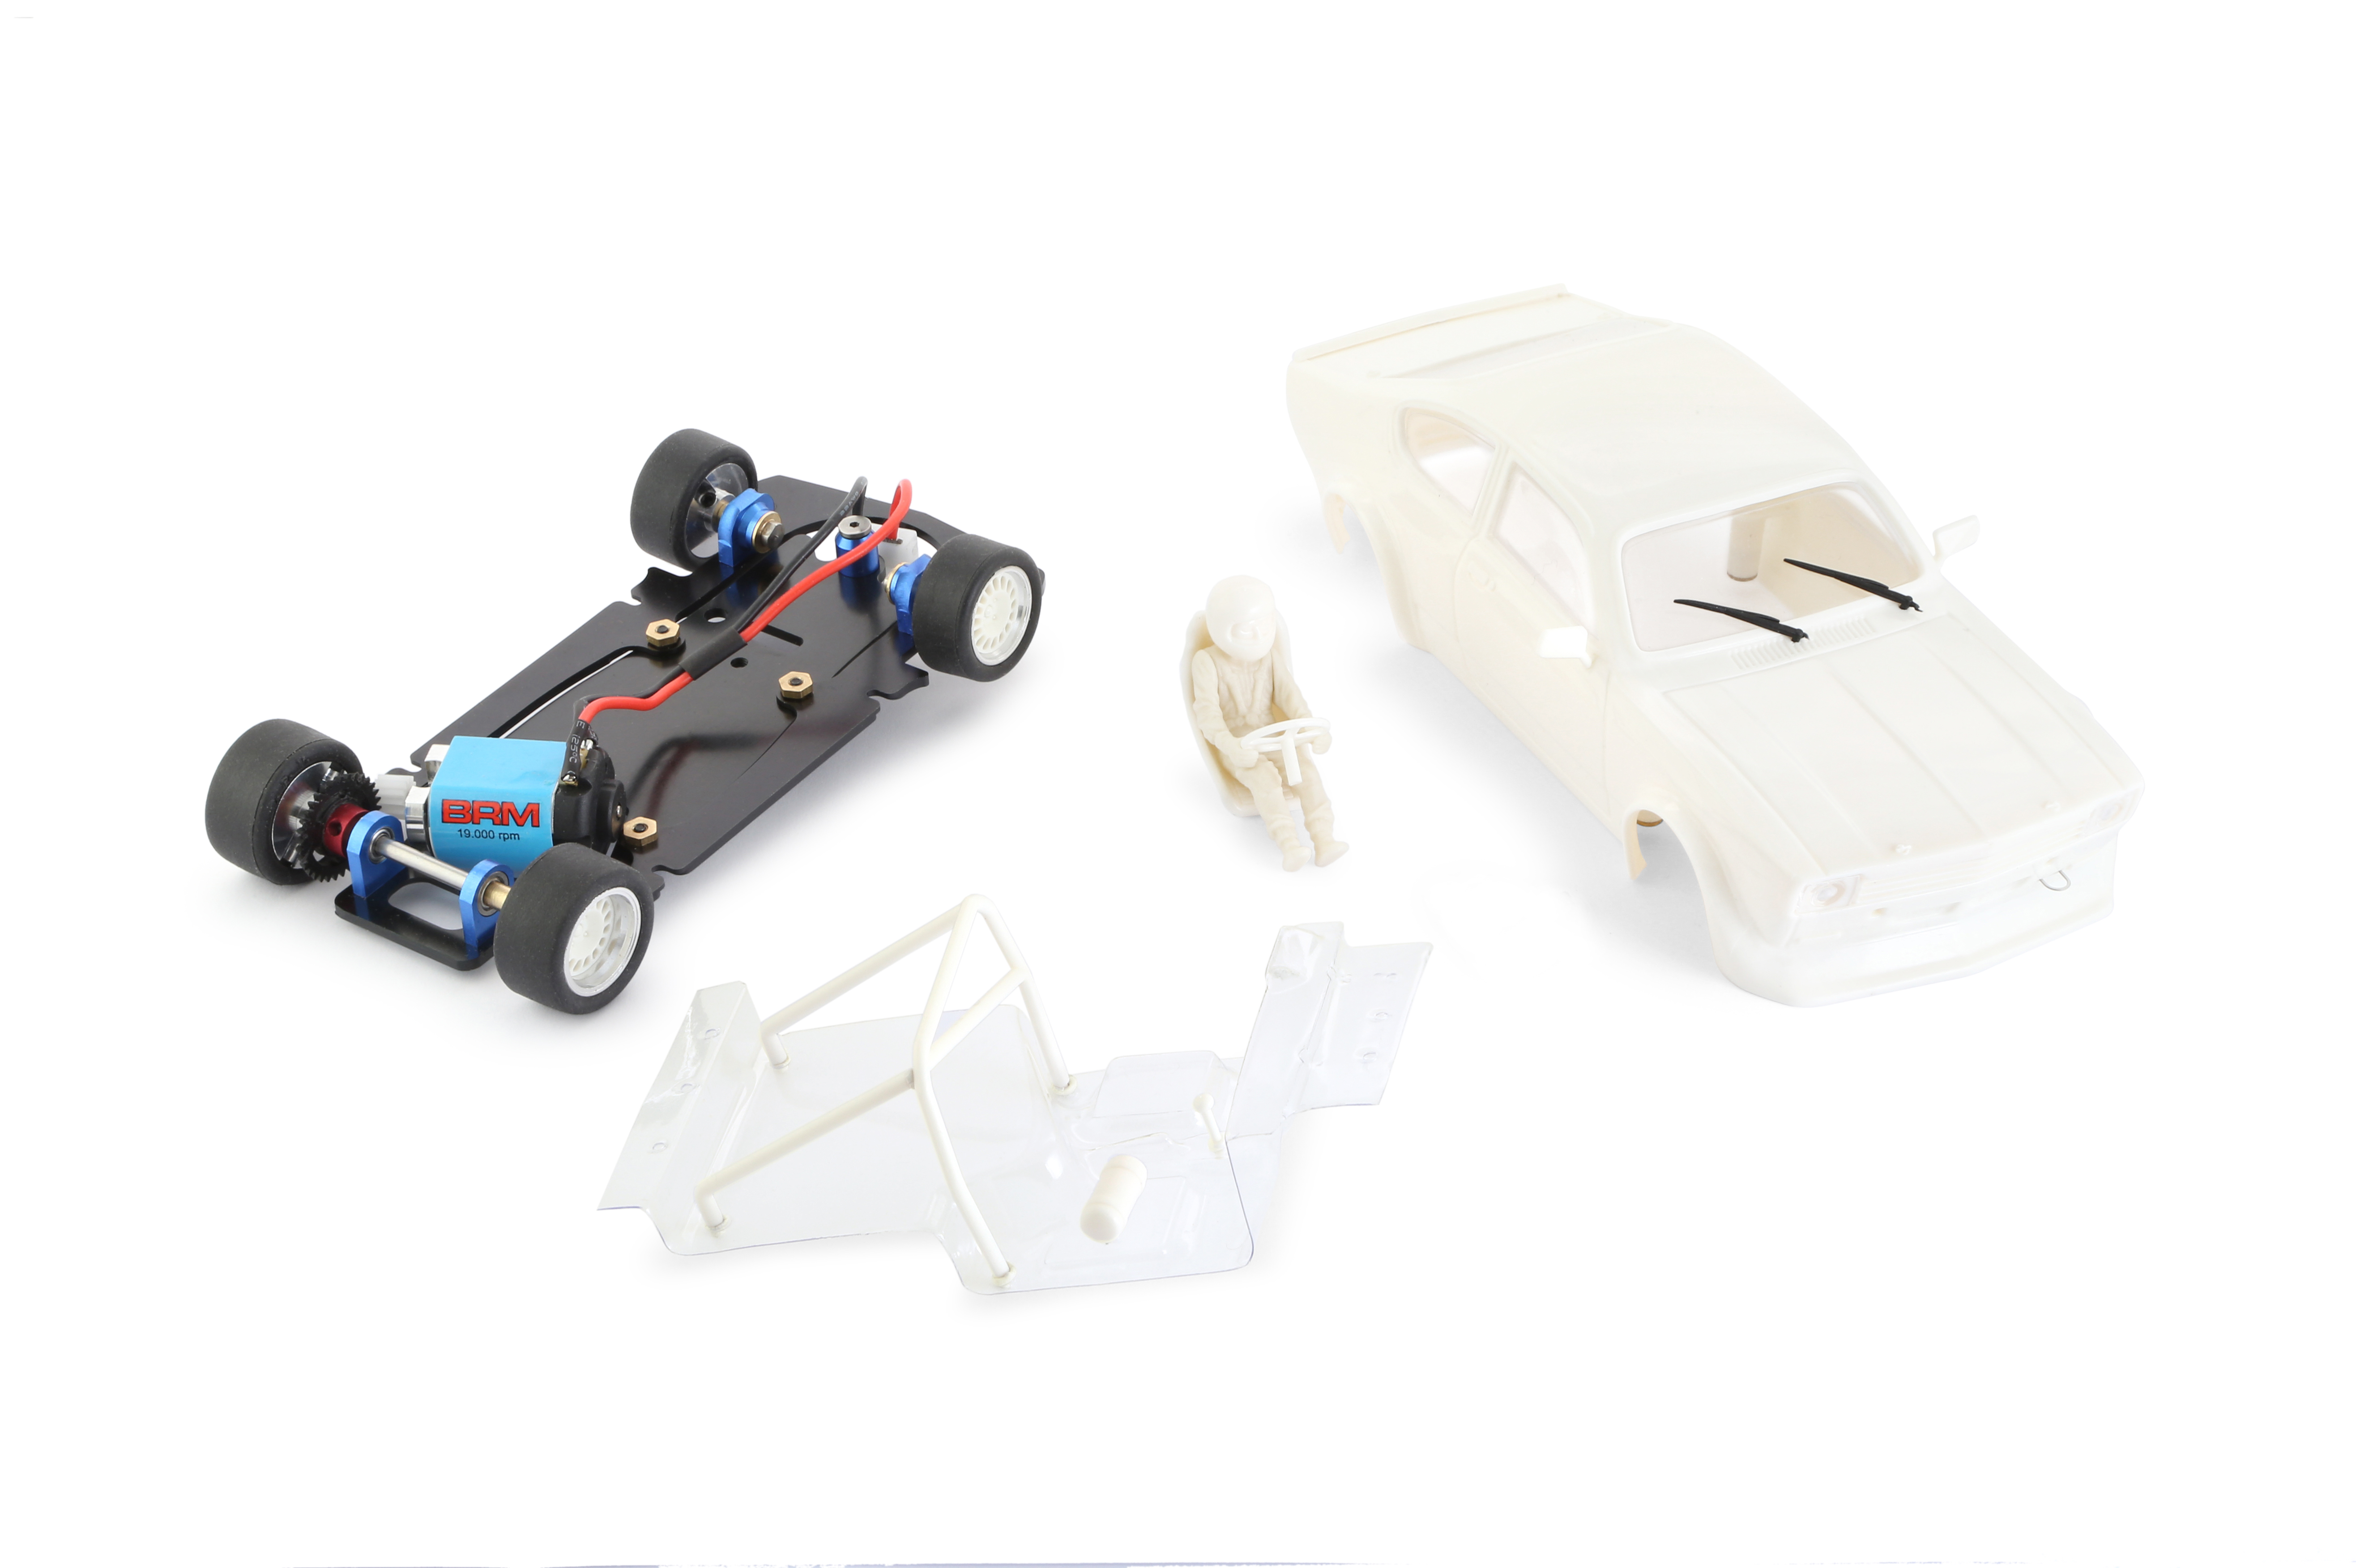 BRM101A Opel Kadett White Kit with complete chassis